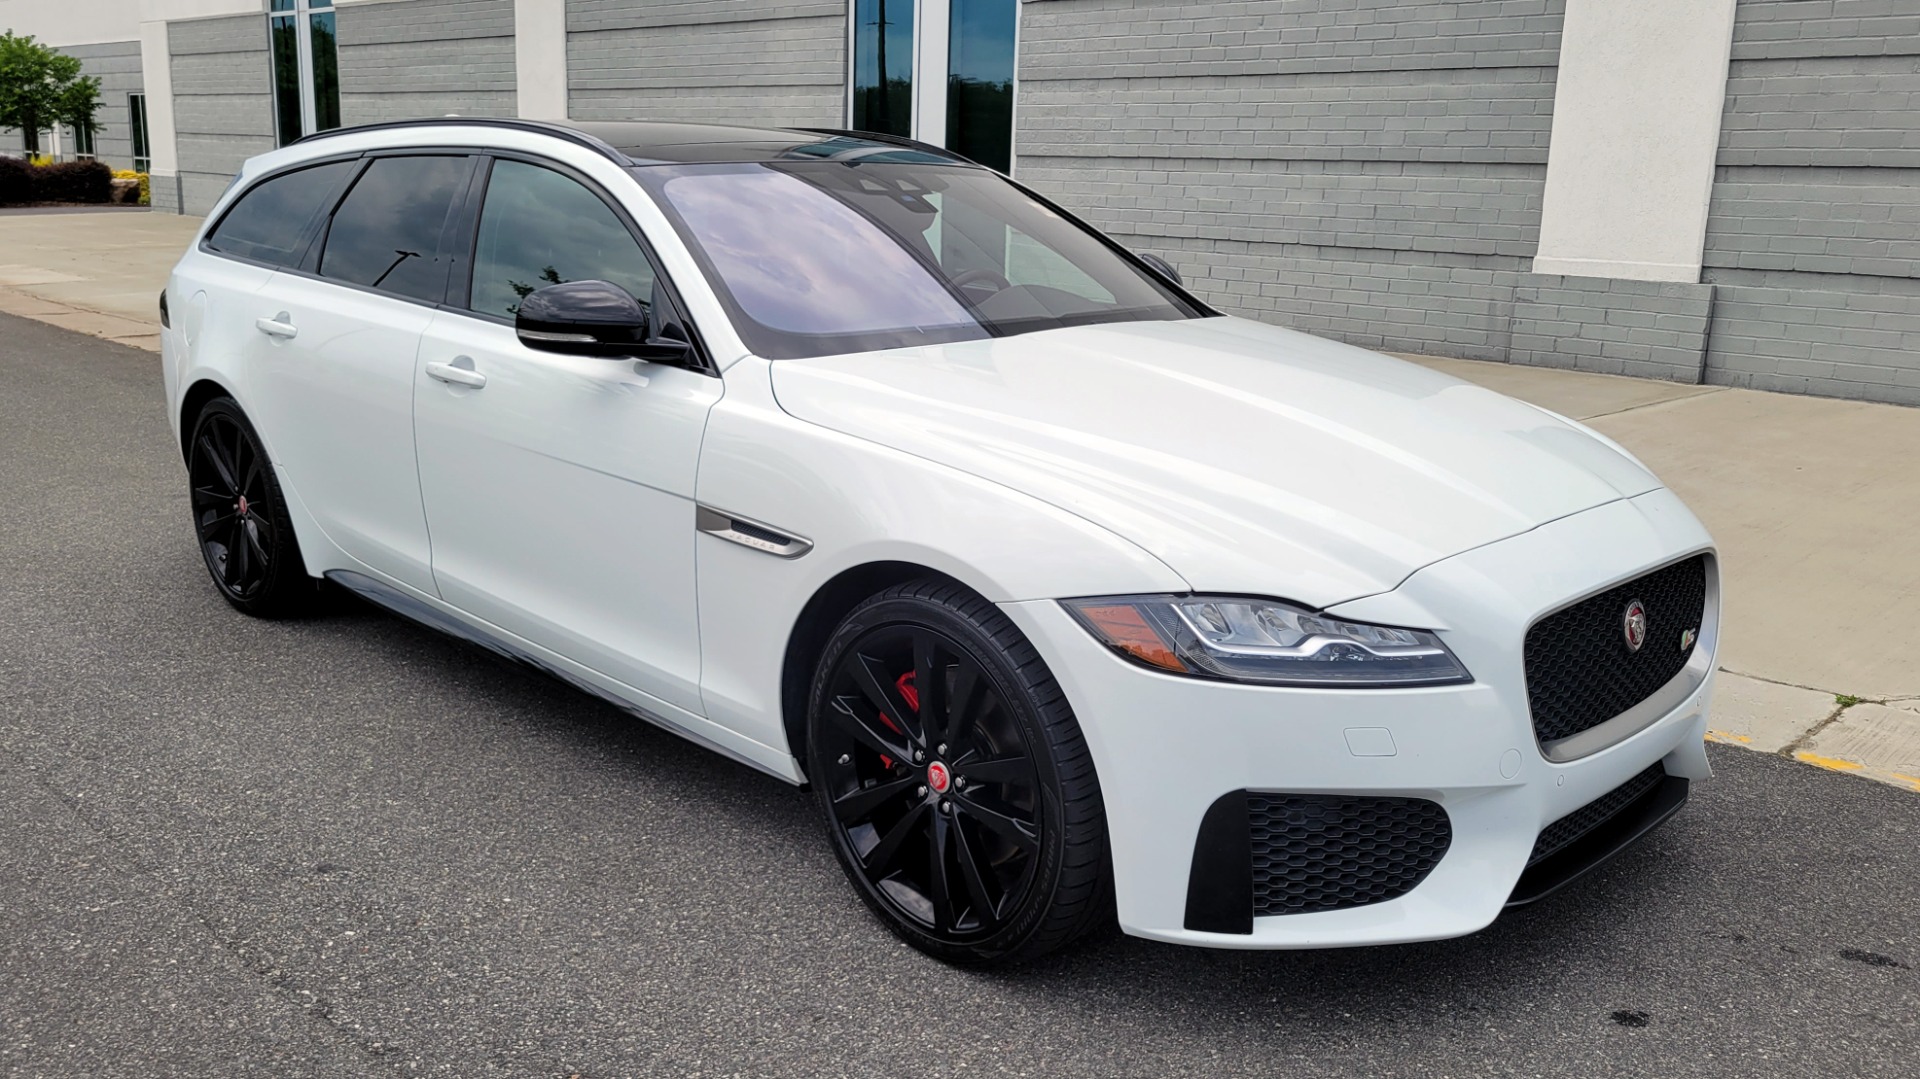 Used 2018 Jaguar XF SPORTBRAKE S / 3.0L / AWD / TECHNOLOGY / NAV / PANO-ROOF / REARVIEW for sale $46,995 at Formula Imports in Charlotte NC 28227 7